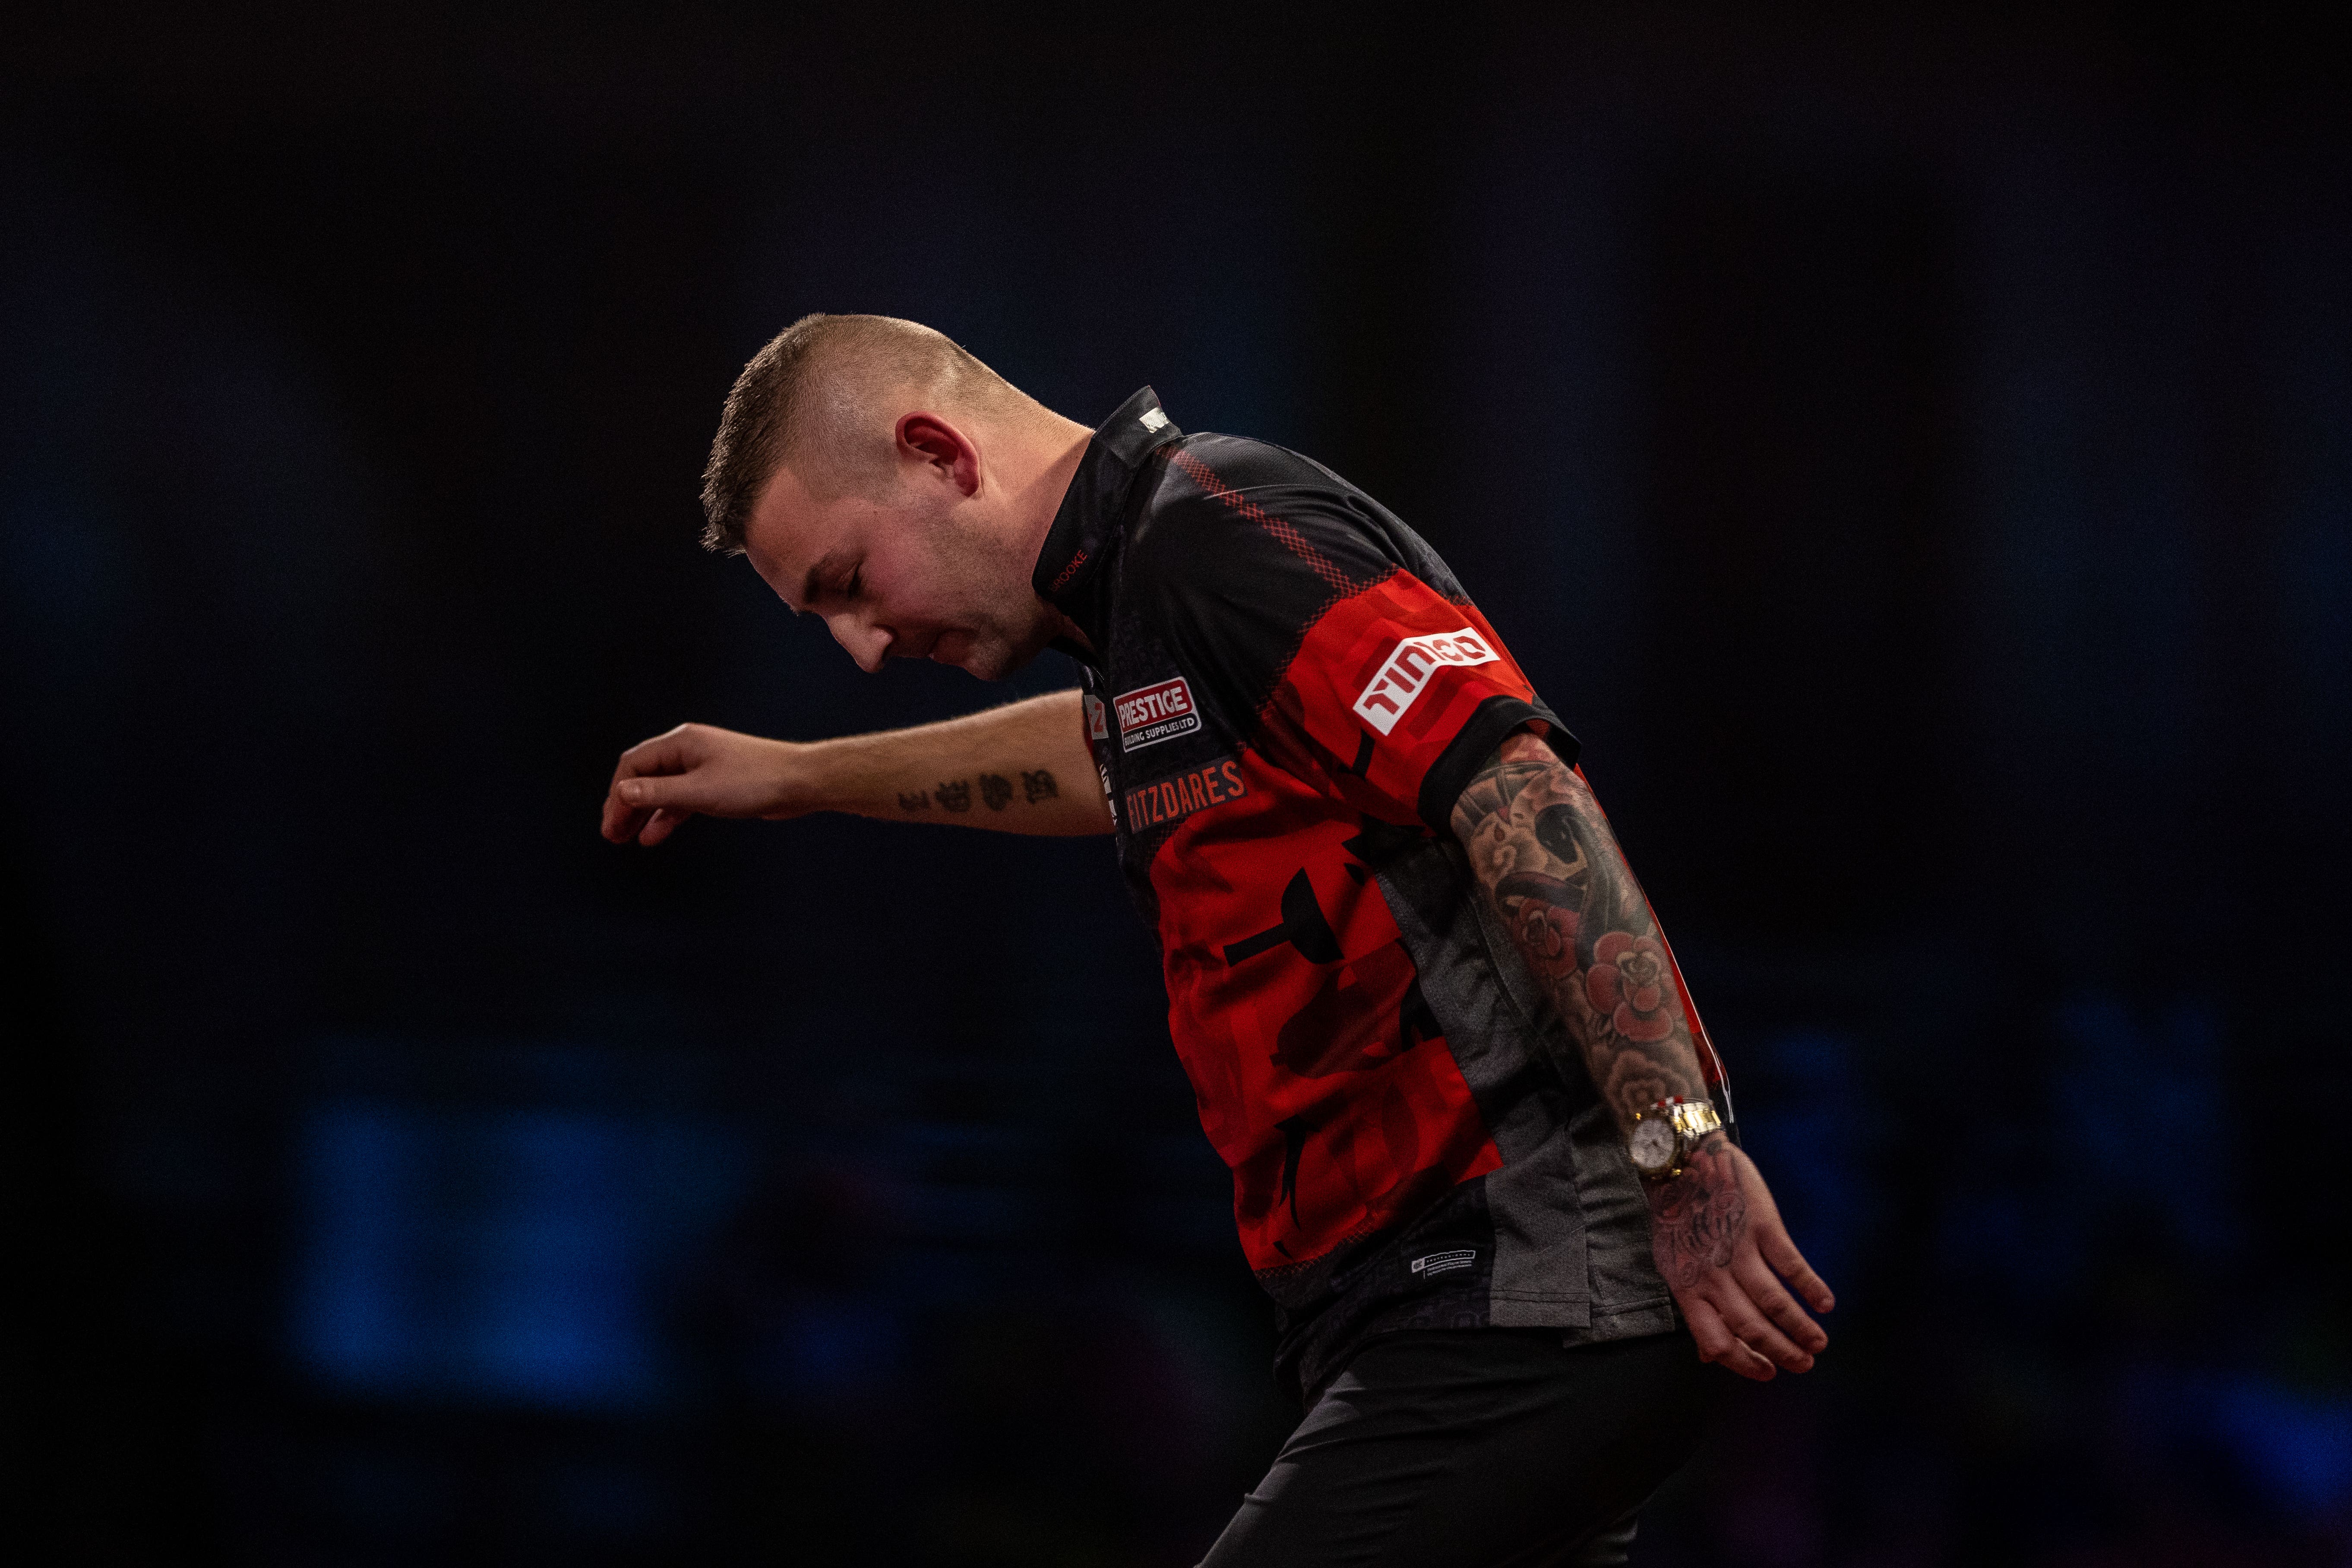 Nathan Aspinall suffered a first-round defeat in the World Grand Prix of Darts (Steven Paston/PA)